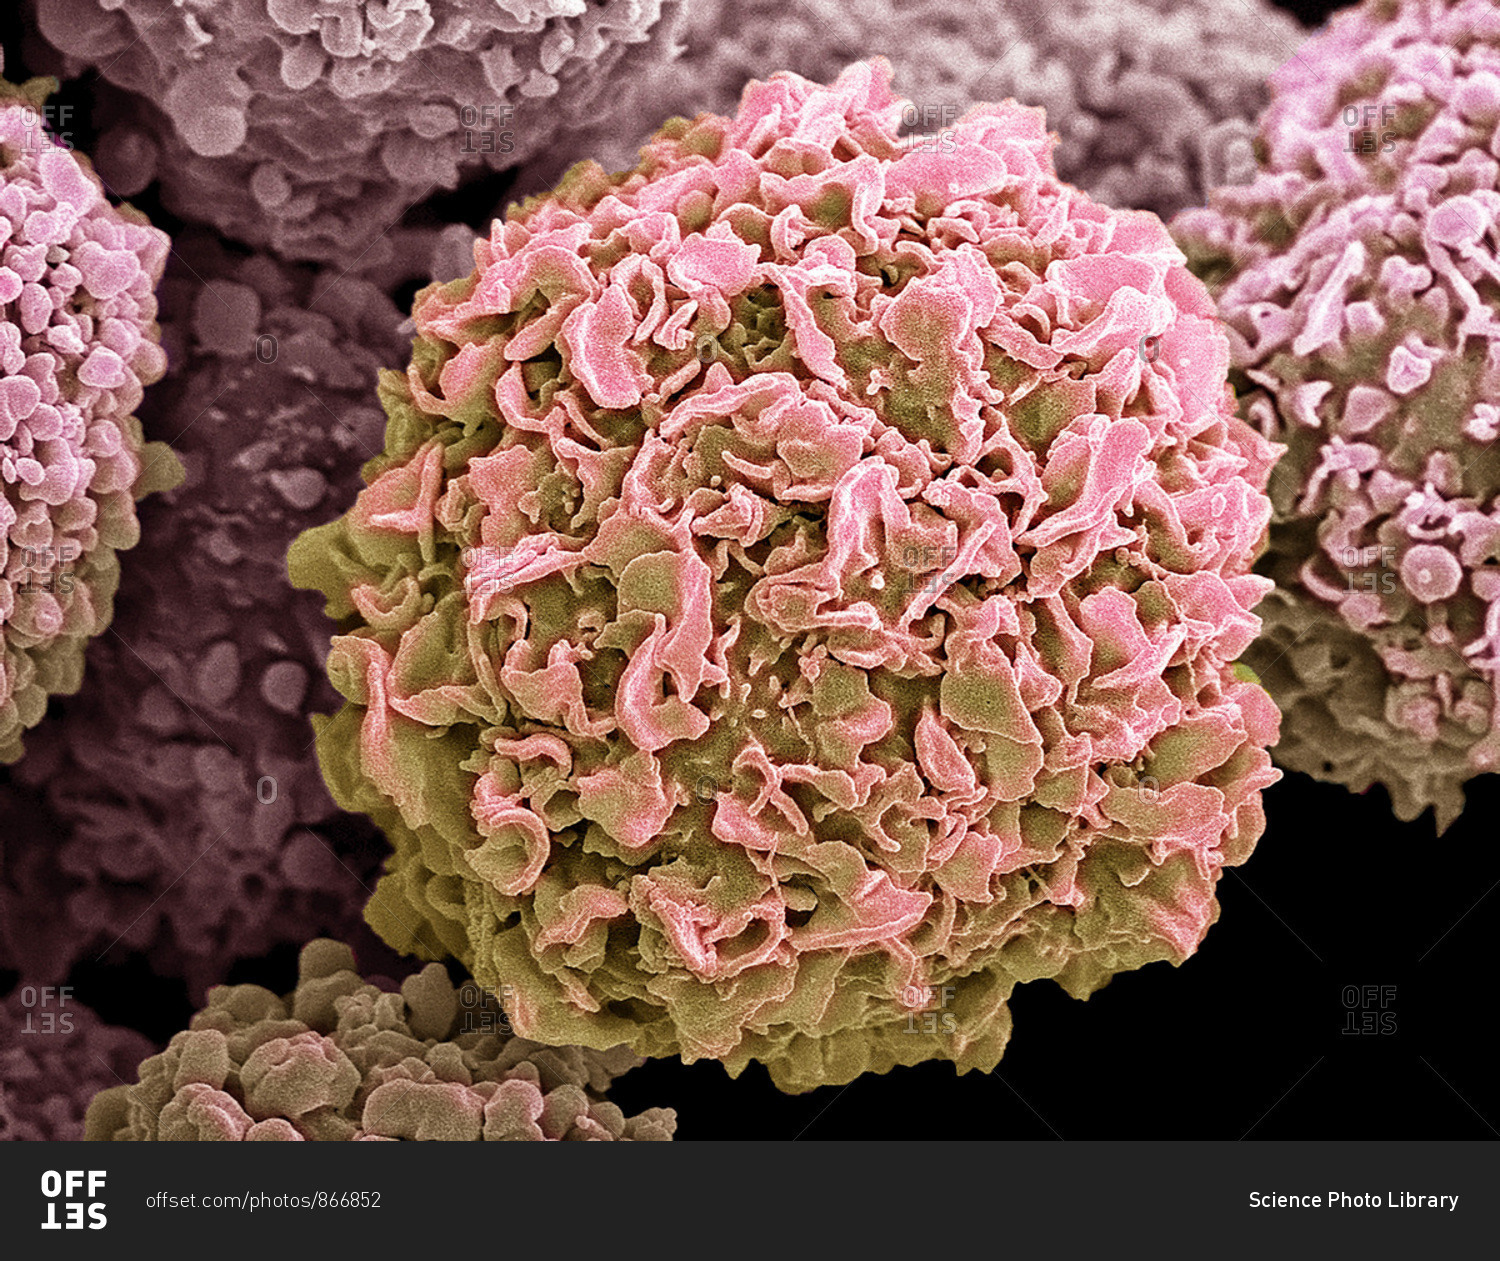 Breast cancer cells. Colored scanning electron micrograph (SEM) of breast cancer cells. The cells shows numerous processes and micro plicae (fine surface folds). These features are characteristic of highly mobile cells, and enable cancerous cells to sprea